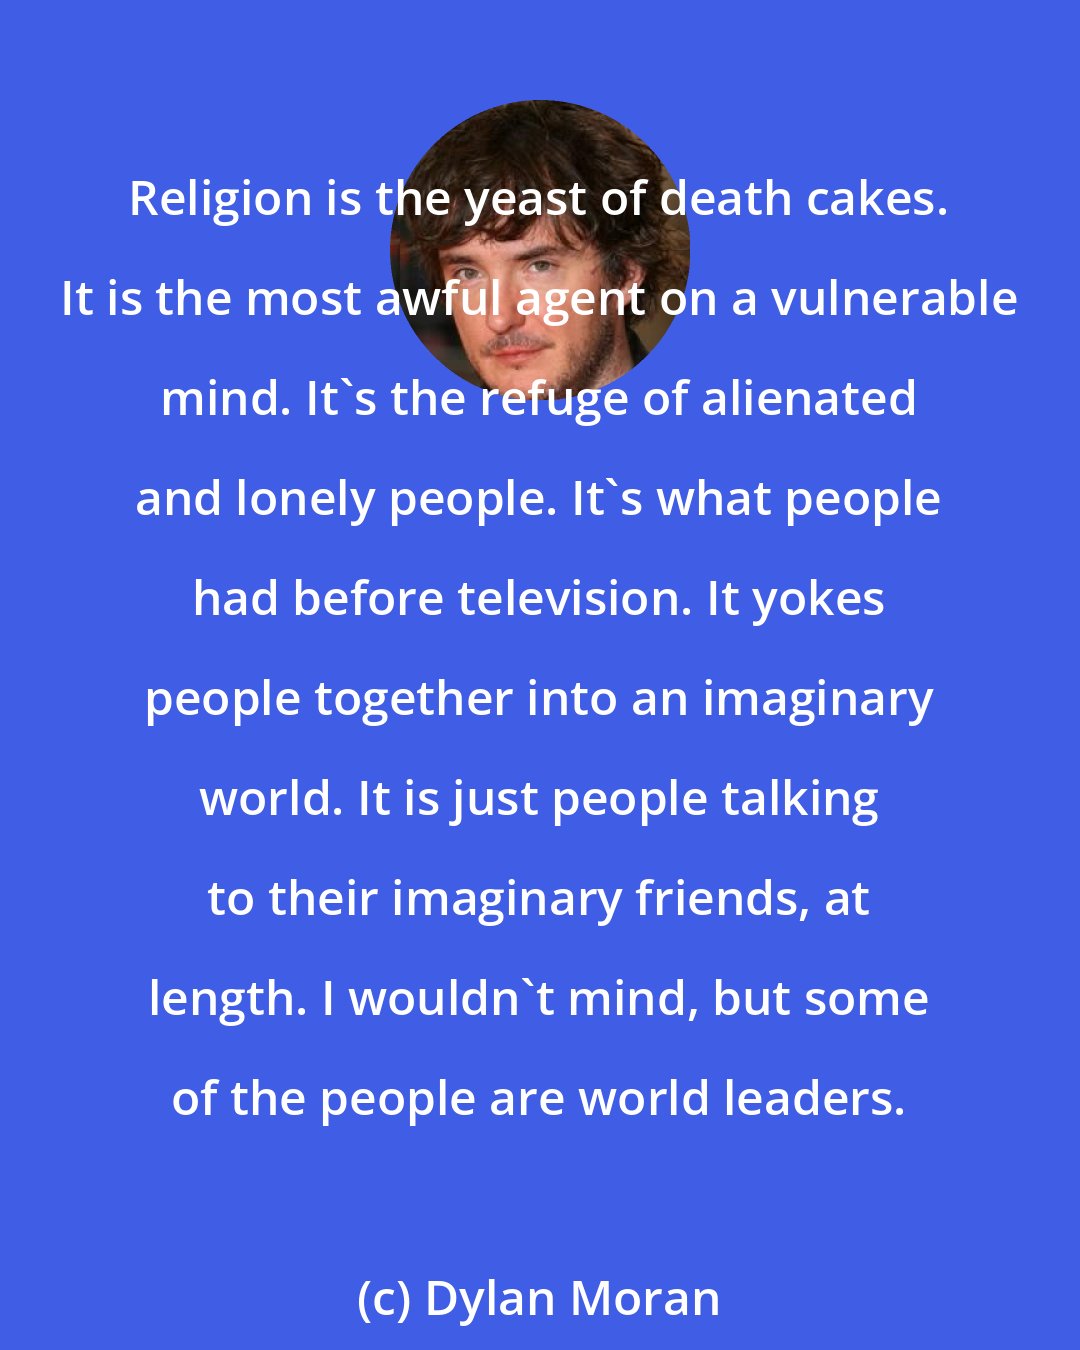 Dylan Moran: Religion is the yeast of death cakes. It is the most awful agent on a vulnerable mind. It's the refuge of alienated and lonely people. It's what people had before television. It yokes people together into an imaginary world. It is just people talking to their imaginary friends, at length. I wouldn't mind, but some of the people are world leaders.